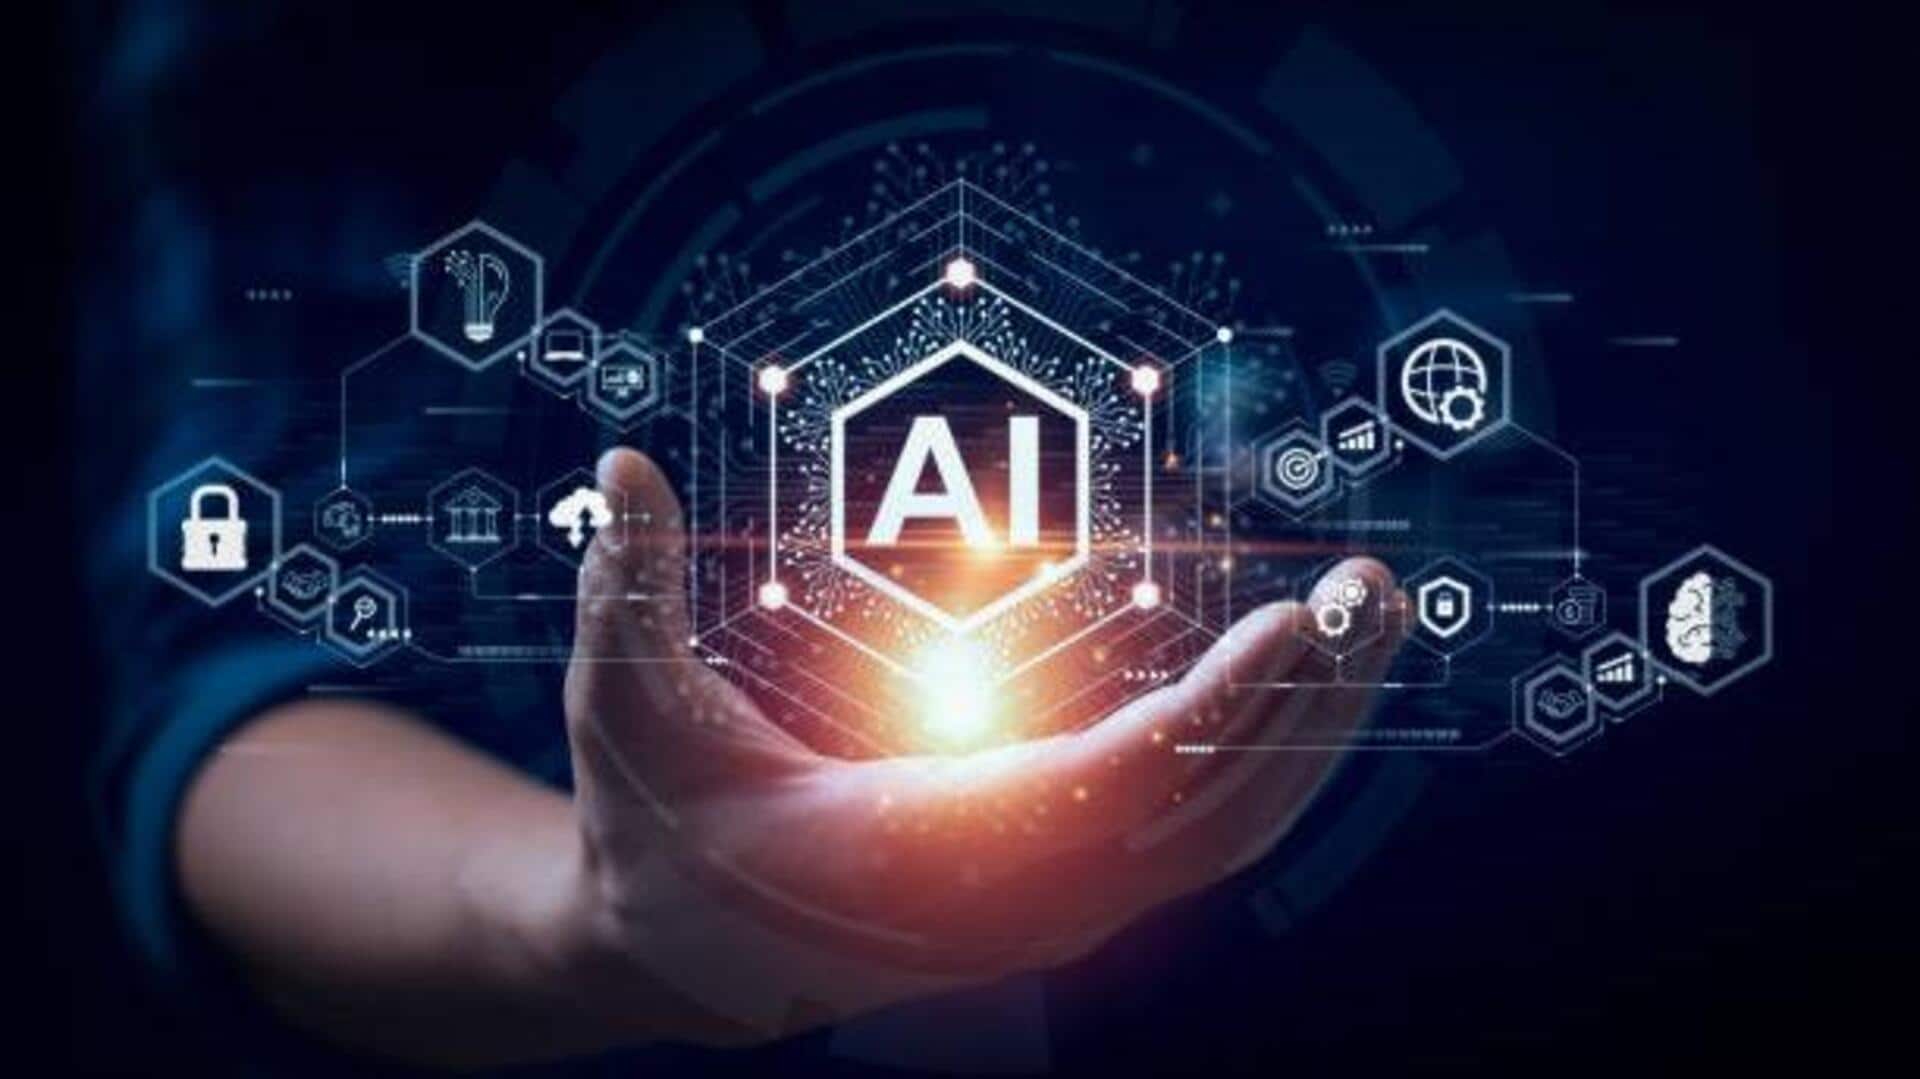 AI surpasses financial analysts in predicting corporate earnings, reveals study